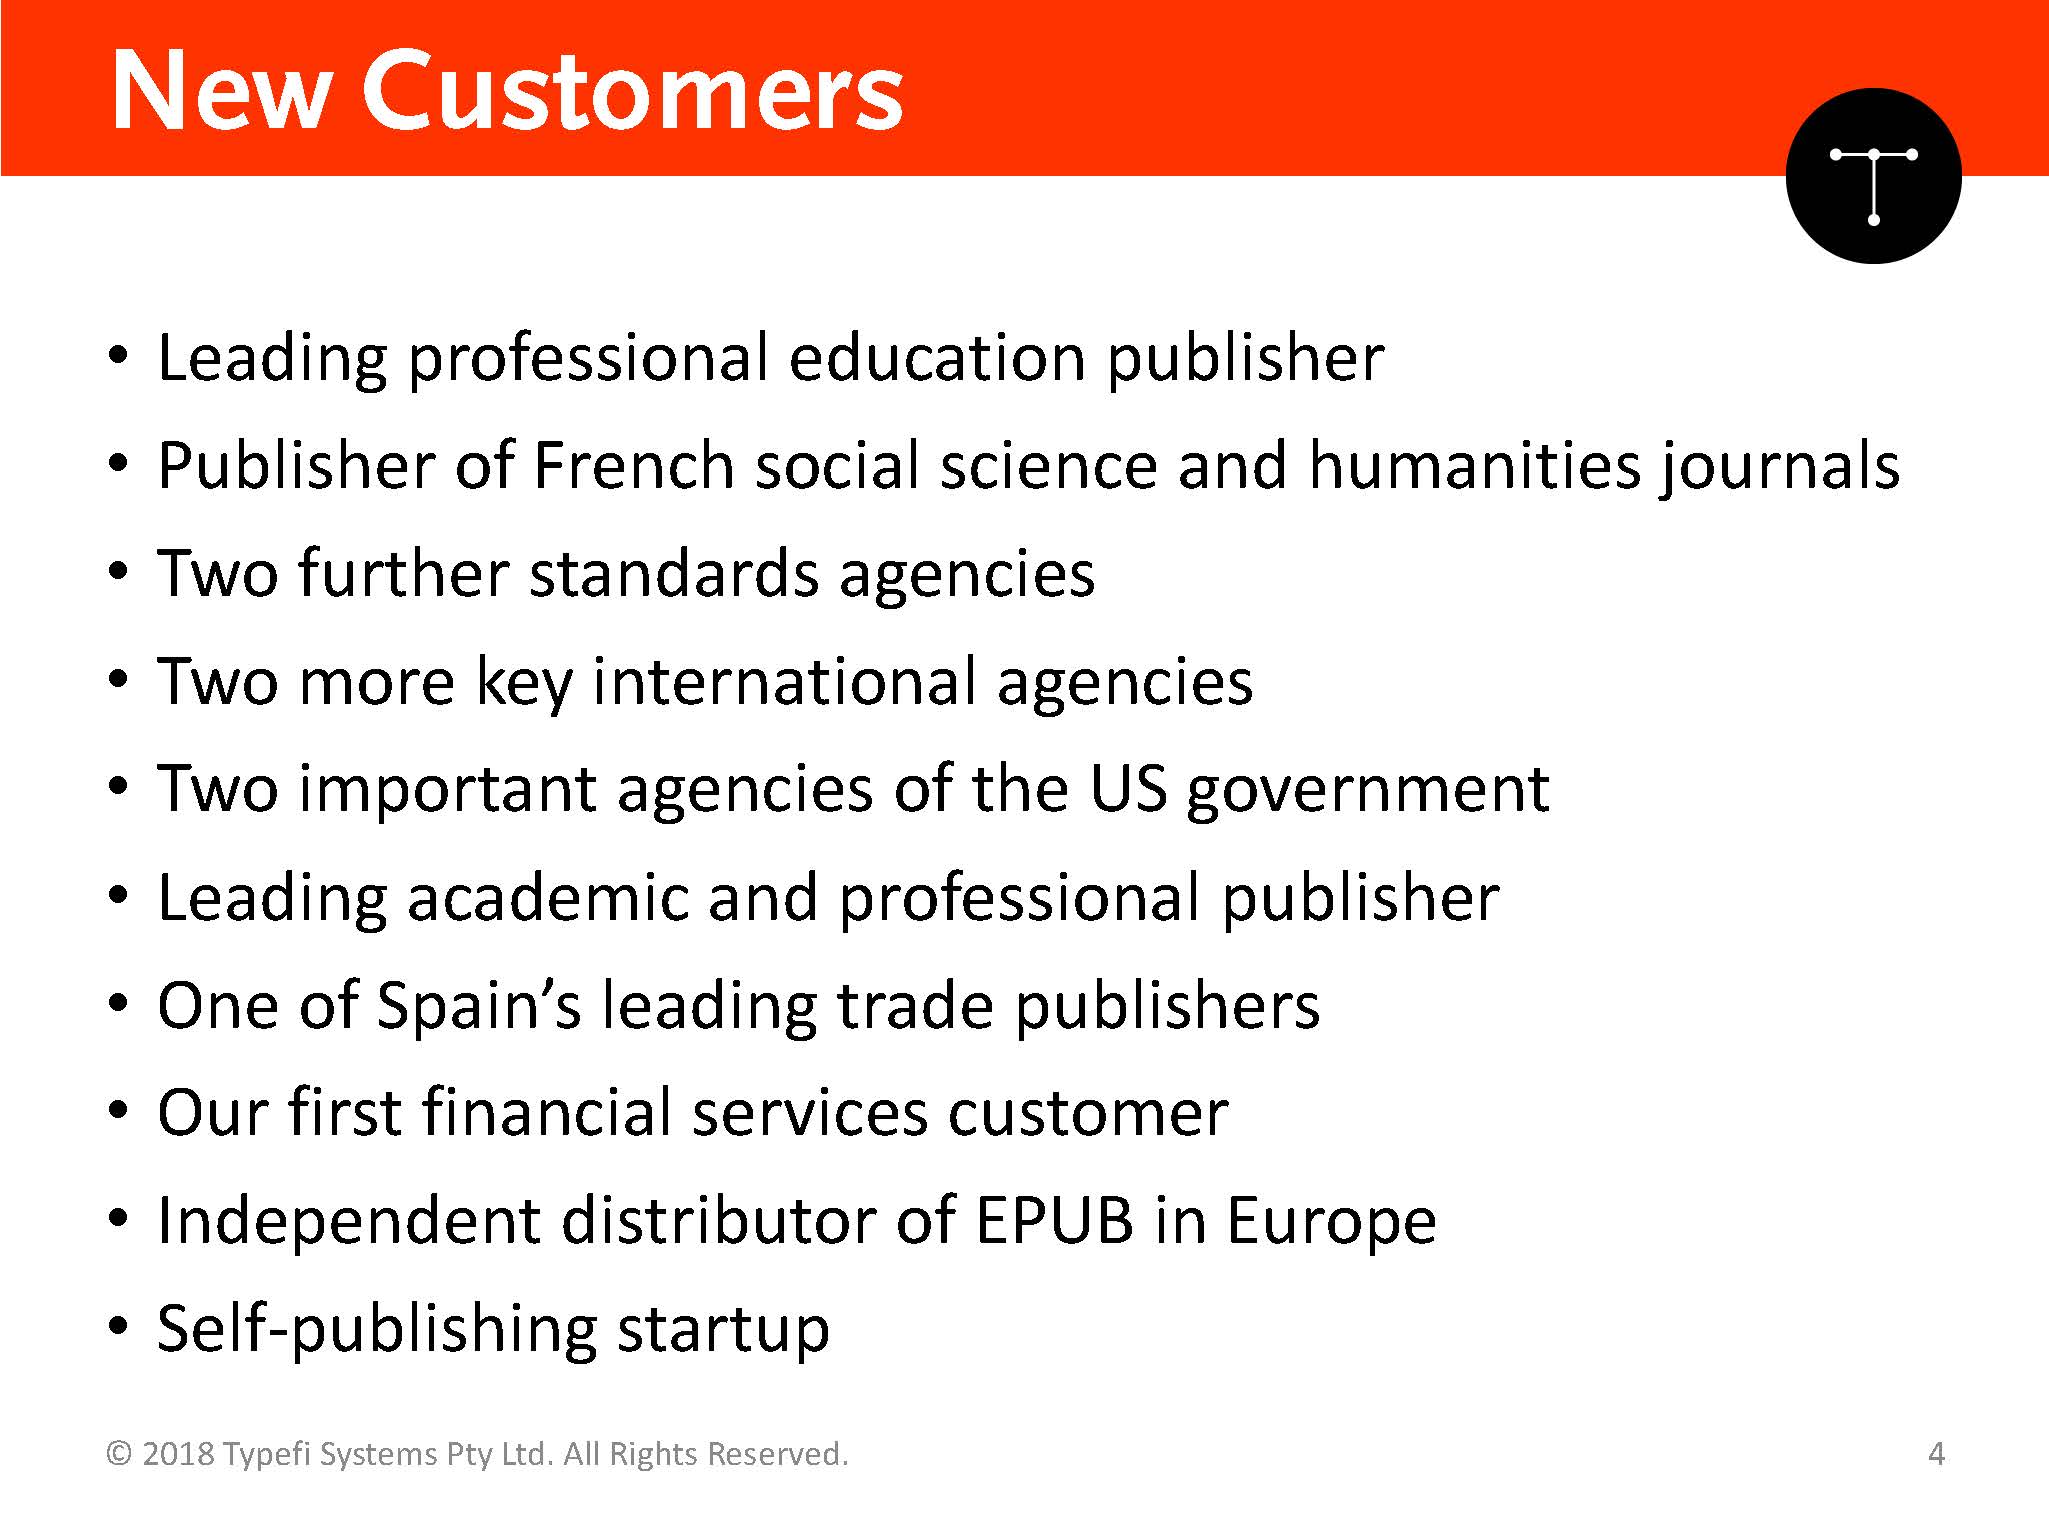 A list of Typefi's new customers, including a leading professional education publisher, a publisher of French social science and humanities journals, two standards agencies, two international agencies, two US Government agencies, a leading academic and professional publisher, one of Spain's leading trade publishers, a financial services company, an independent distributor of EPUB in Europe, and a self-publishing startup.